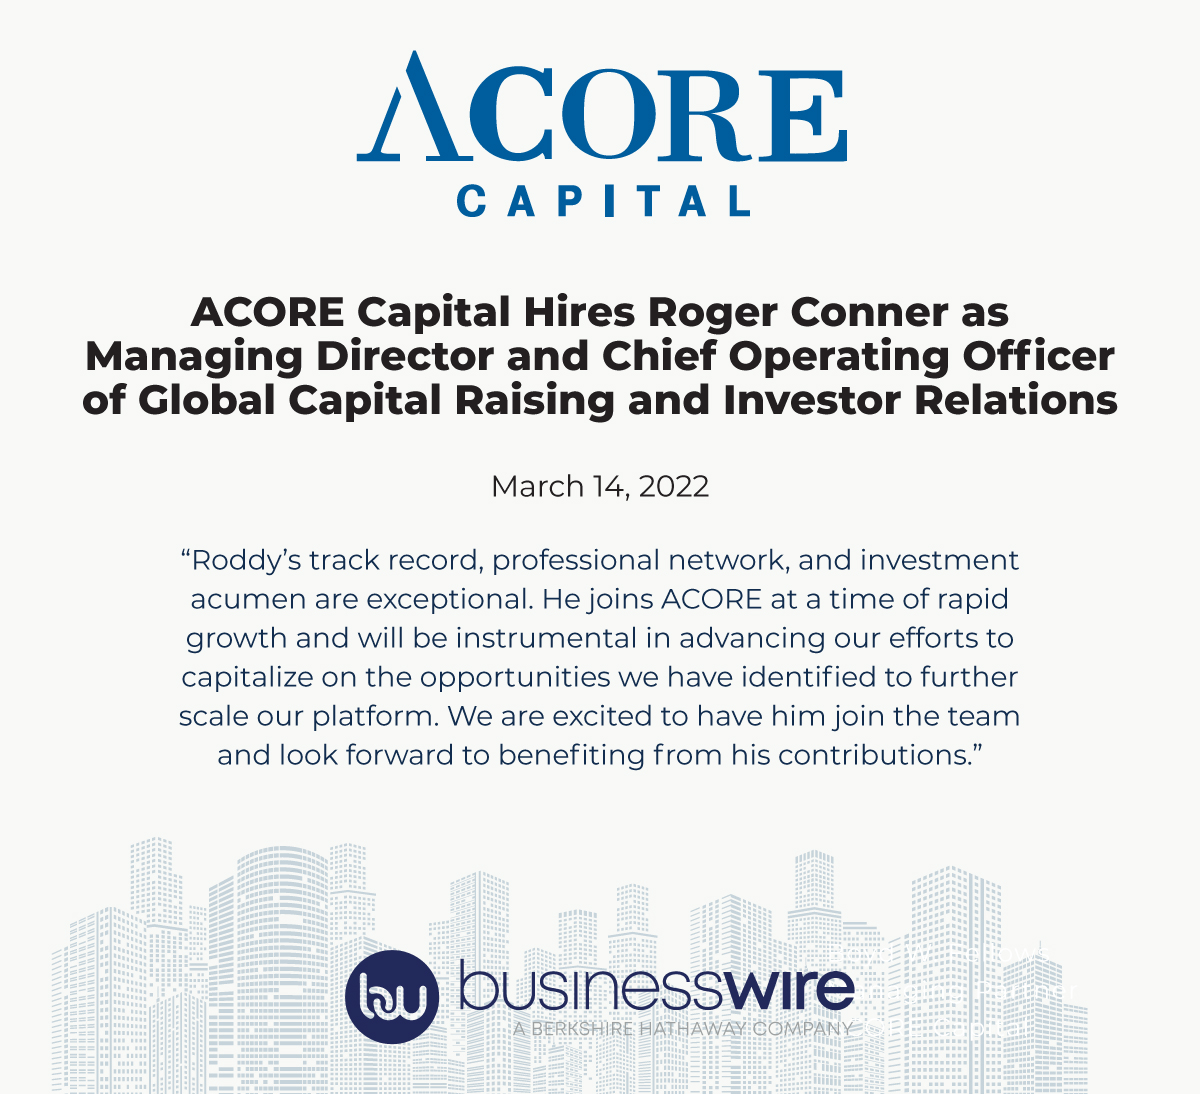 ACORE Capital Hires Roger Conner as Managing Director and Chief Operating Officer of Global Capital Raising and Investor Relations